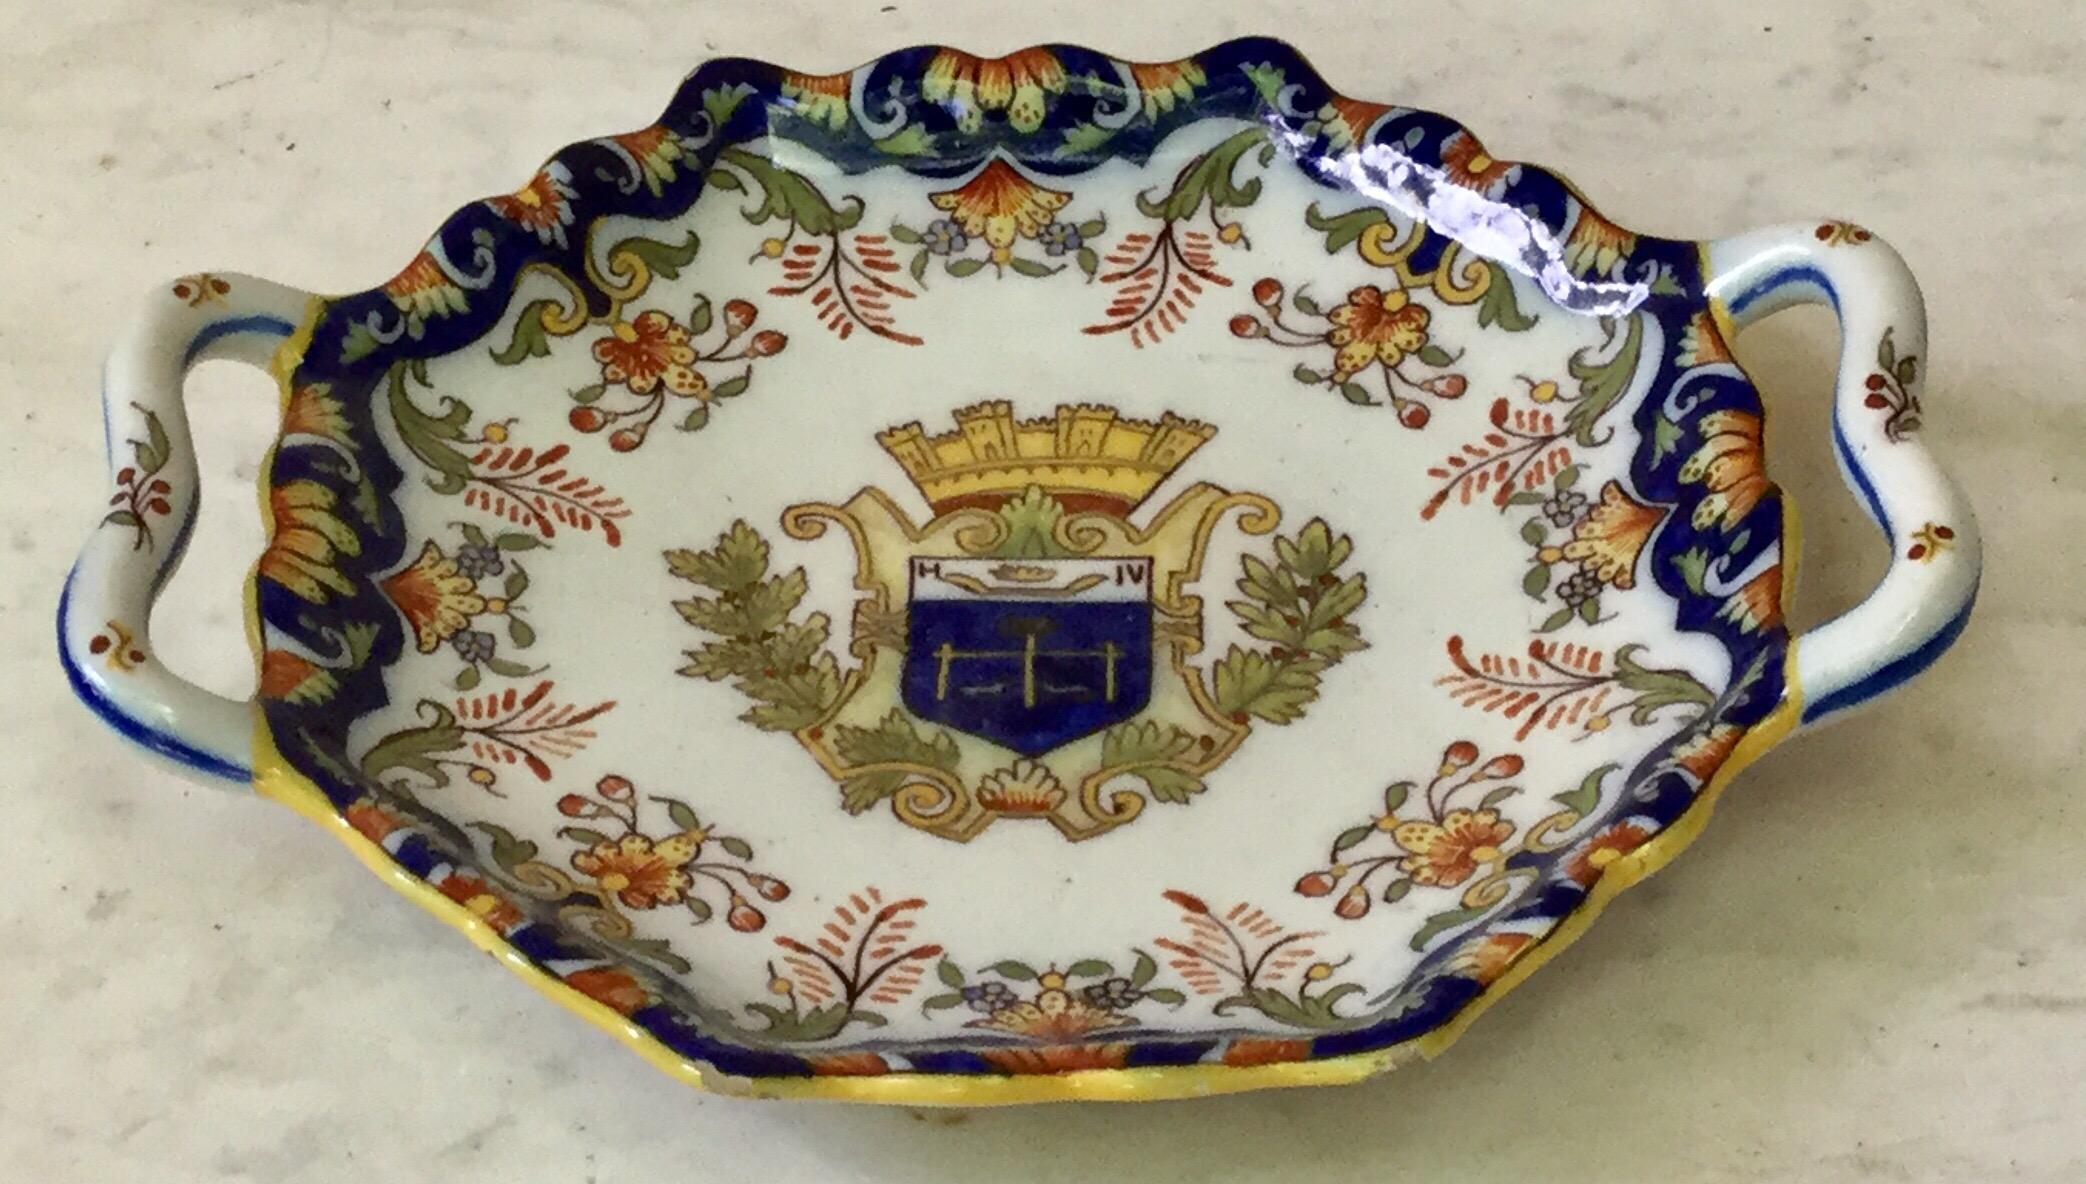 French Provincial French Faience Handled Platter Desvres, circa 1900